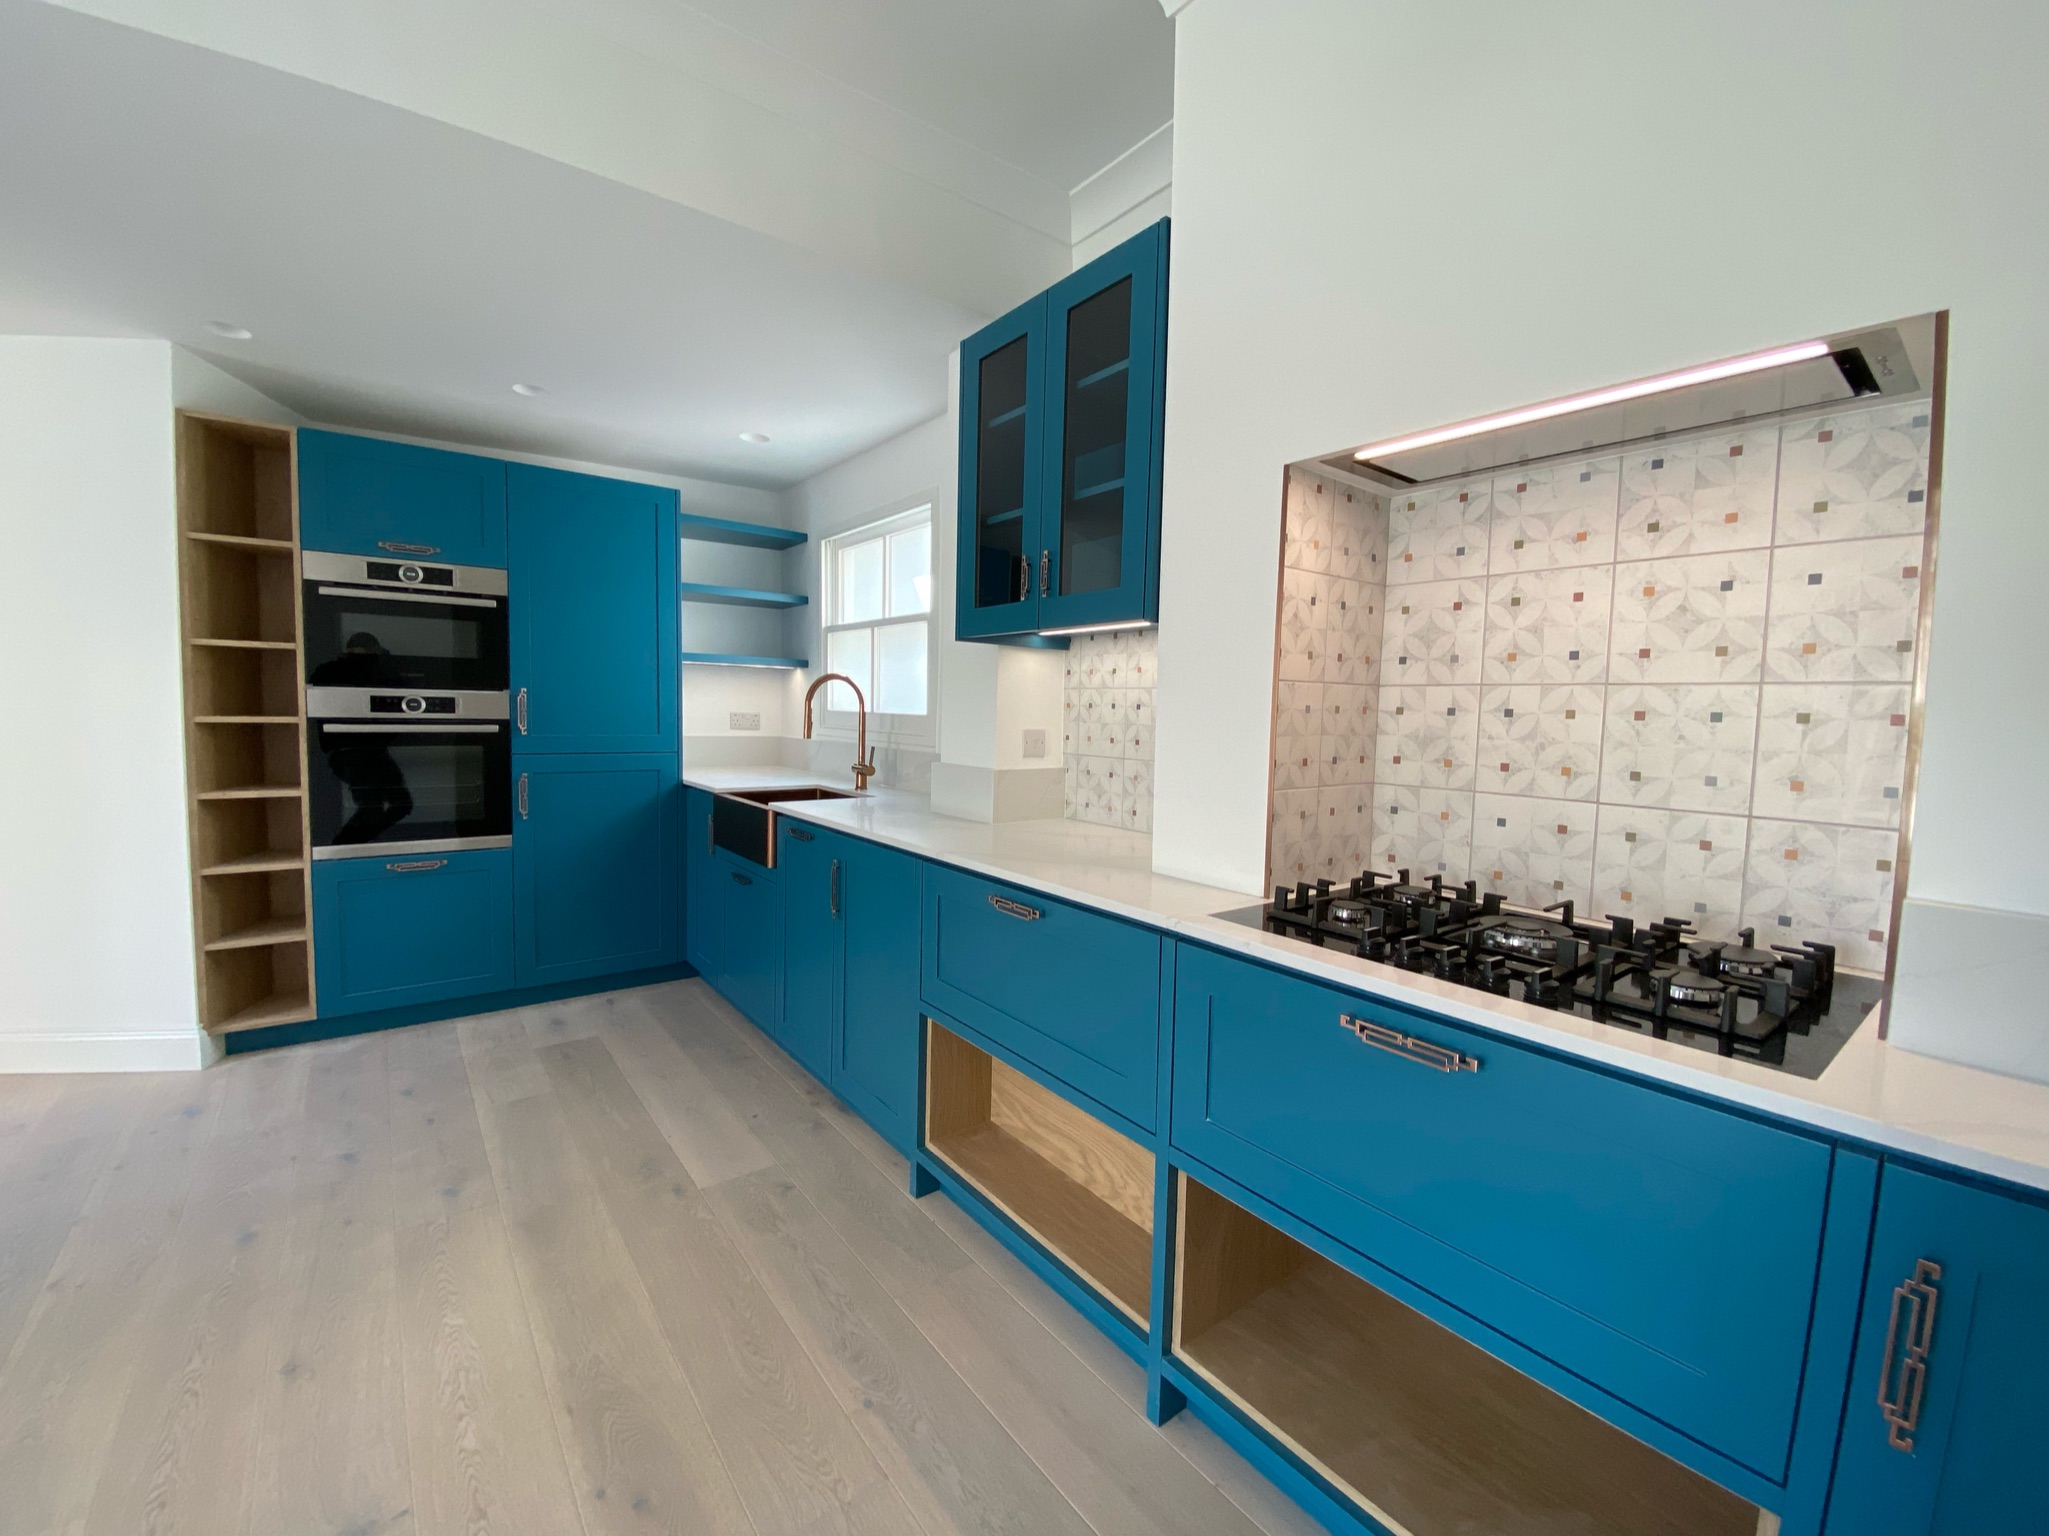 kitchen with teal cabinets and copper sink